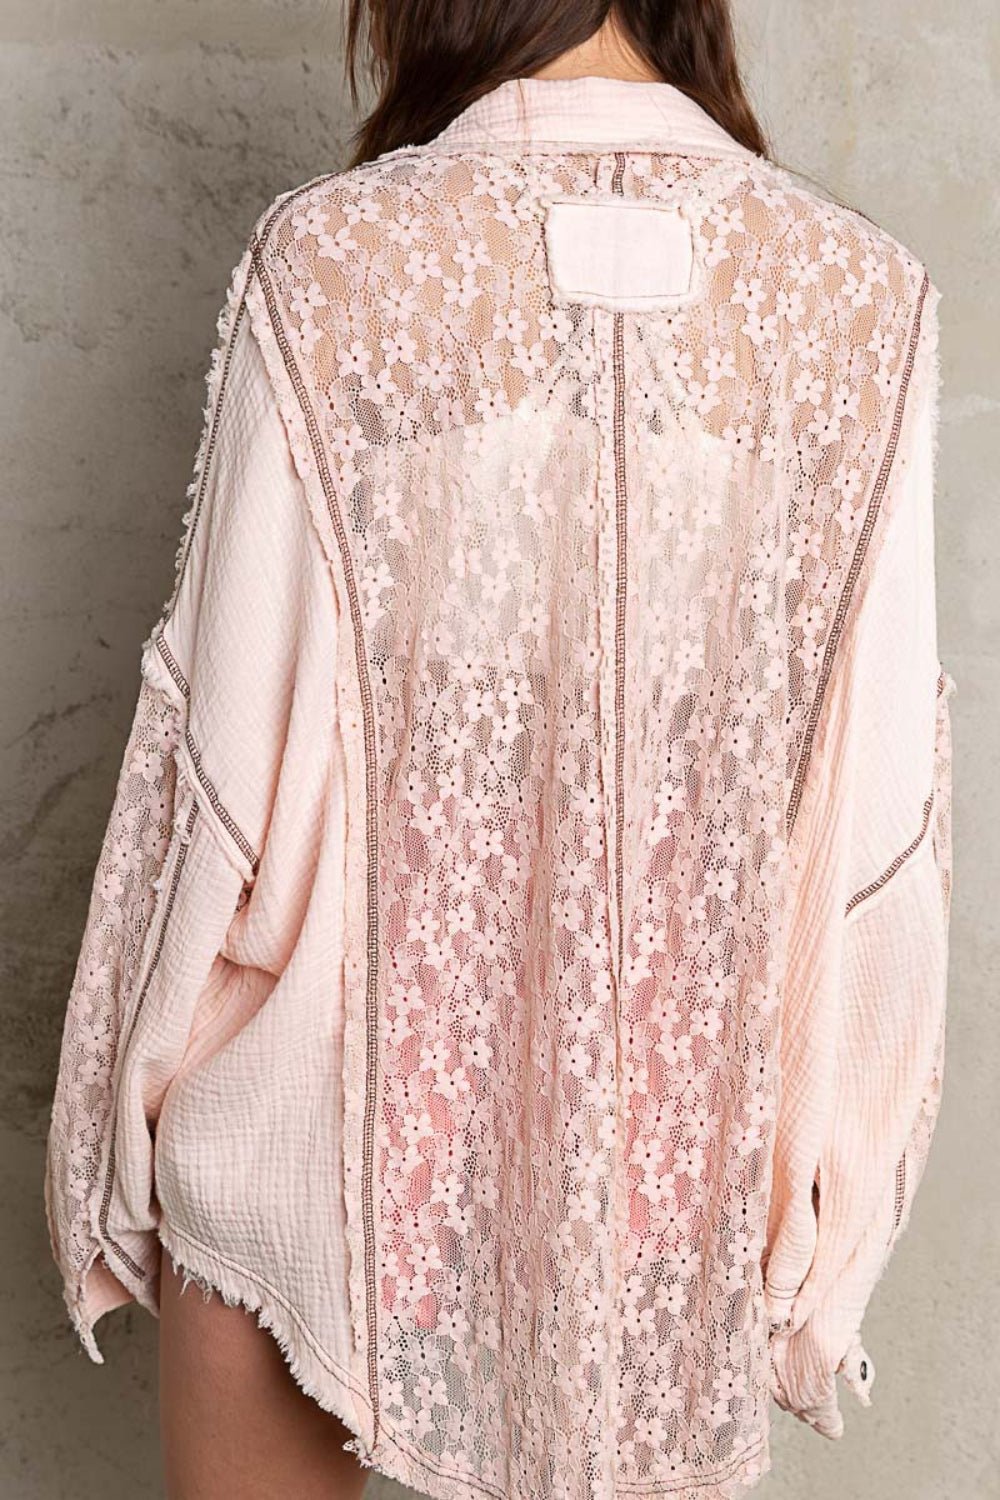 Oversized Lace Button-Down Shirt in Baby PinkShirtPOL